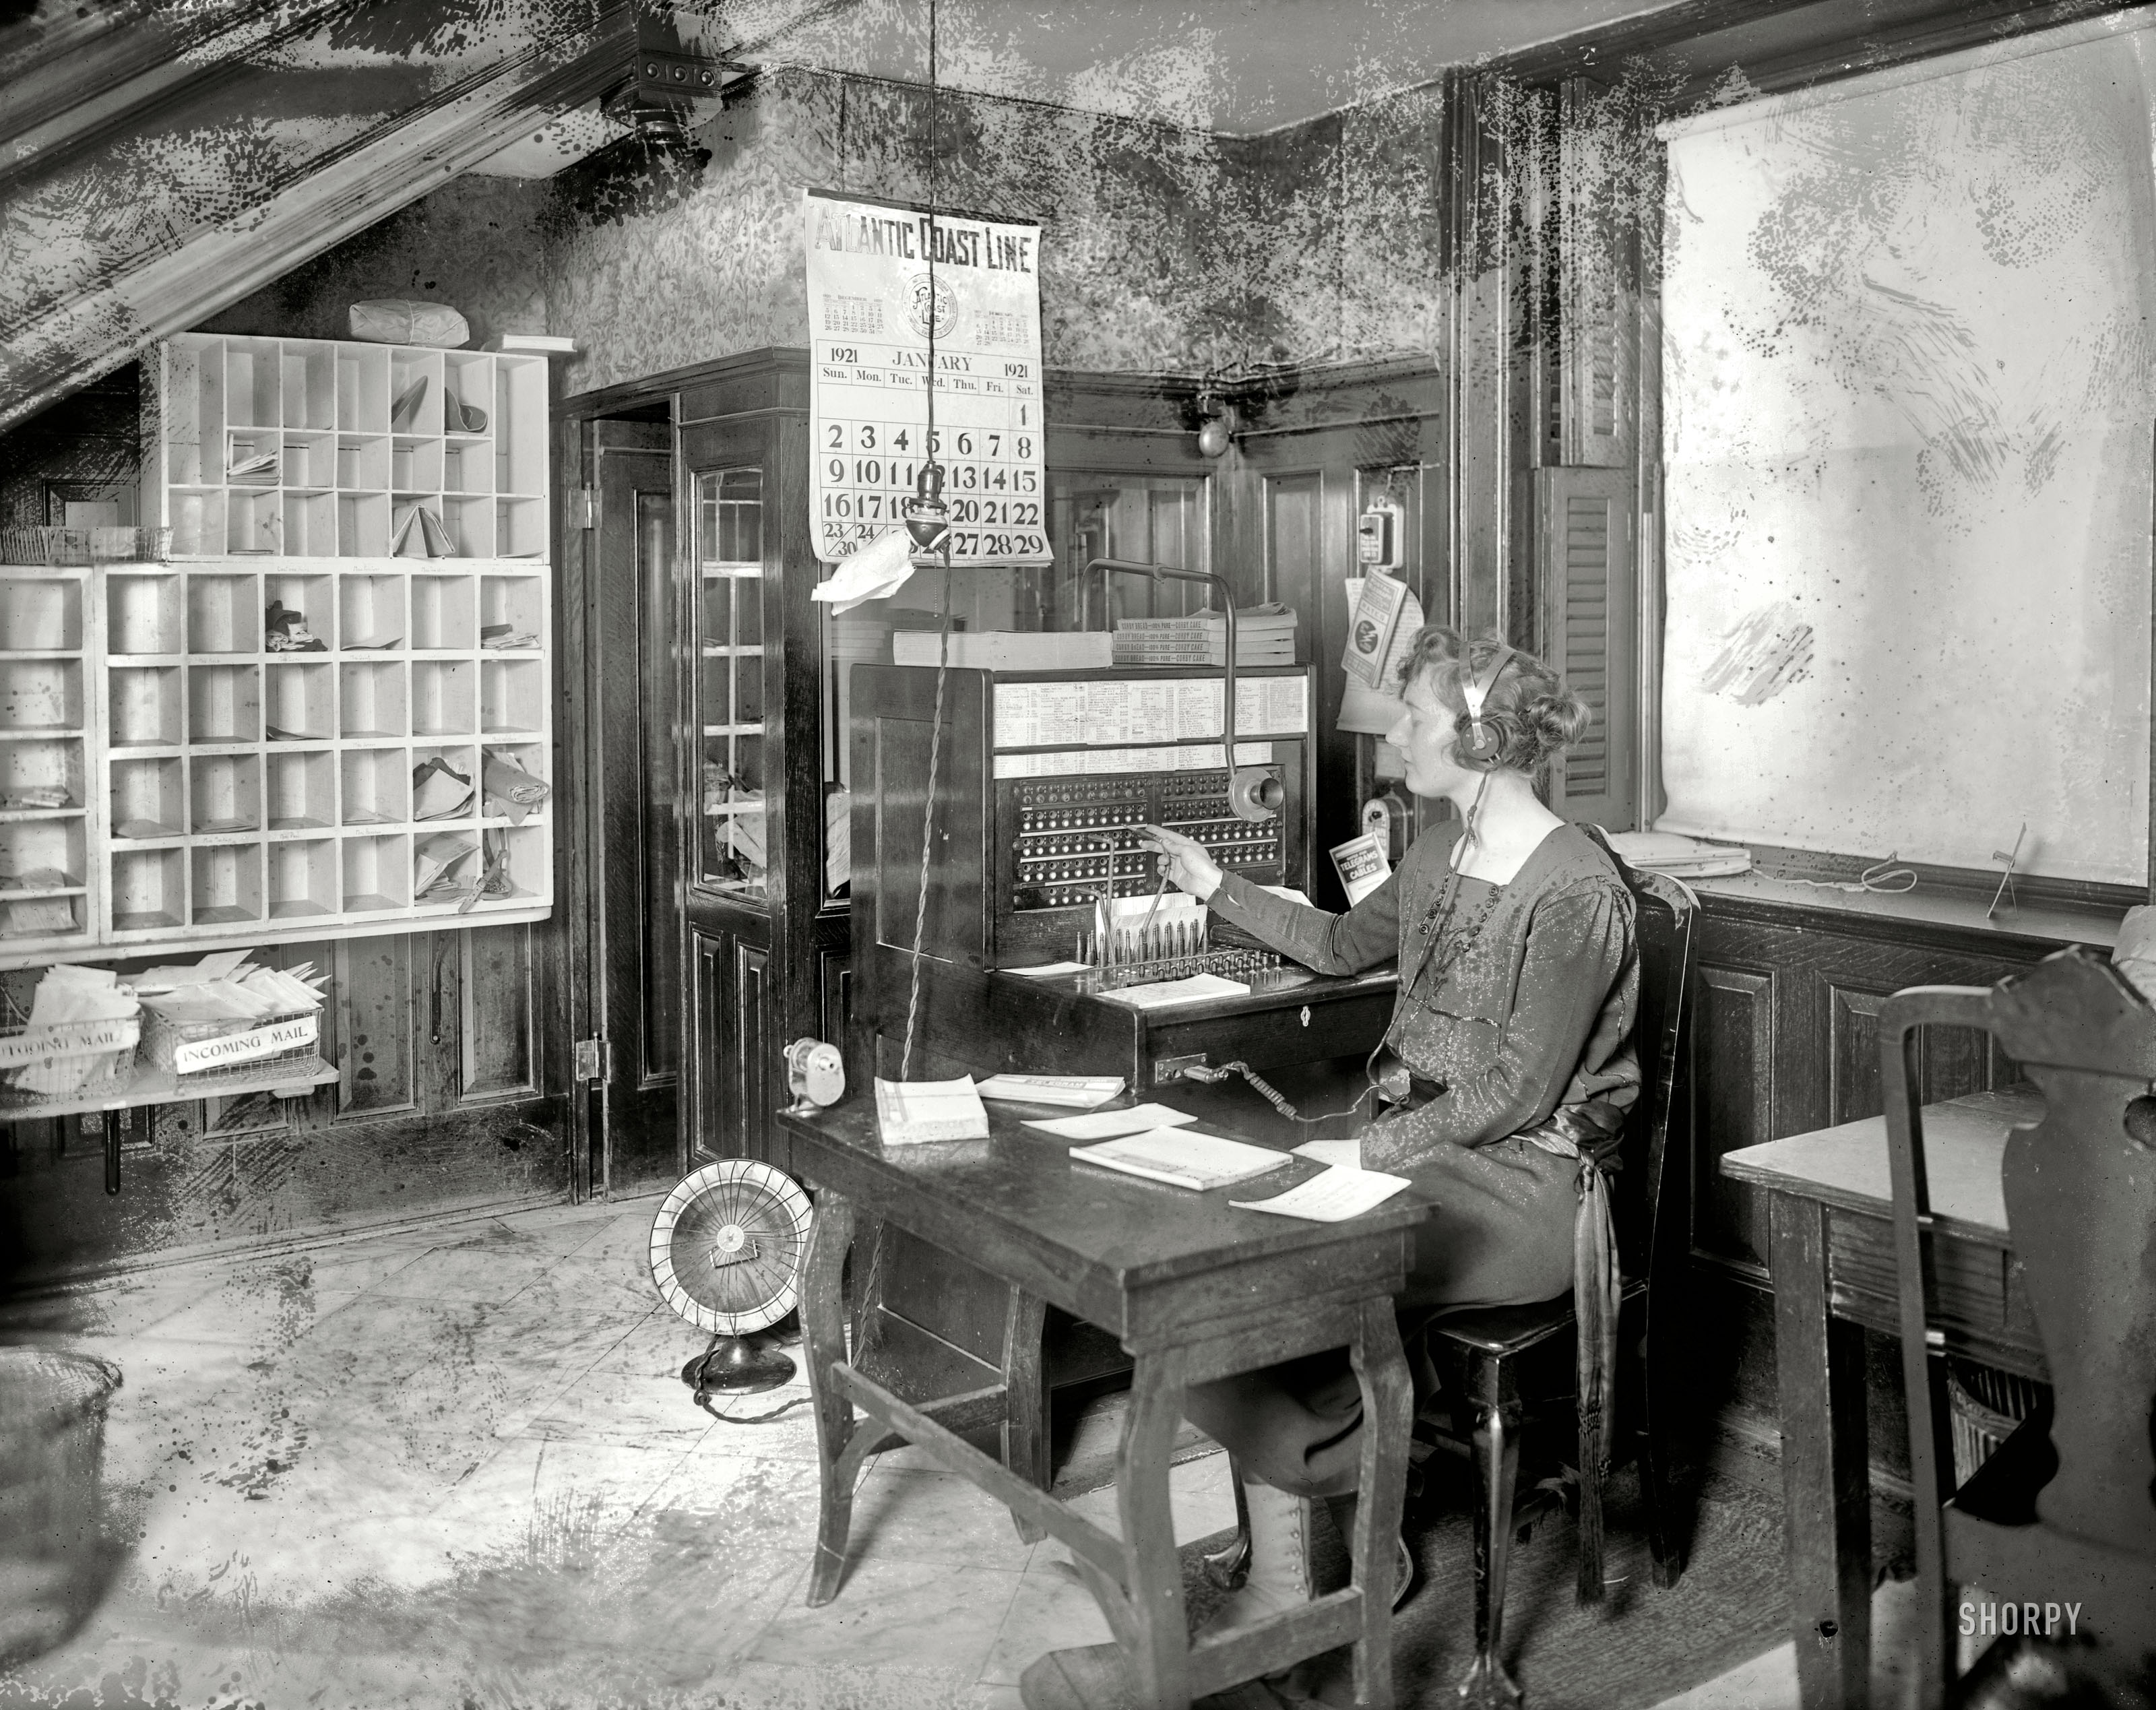 January 1921. Washington, D.C. "National Woman's Party switchboard." If you can ignore the mold and the fingerprints, there are a number of interesting details here. National Photo Company Collection glass negative. View full size.